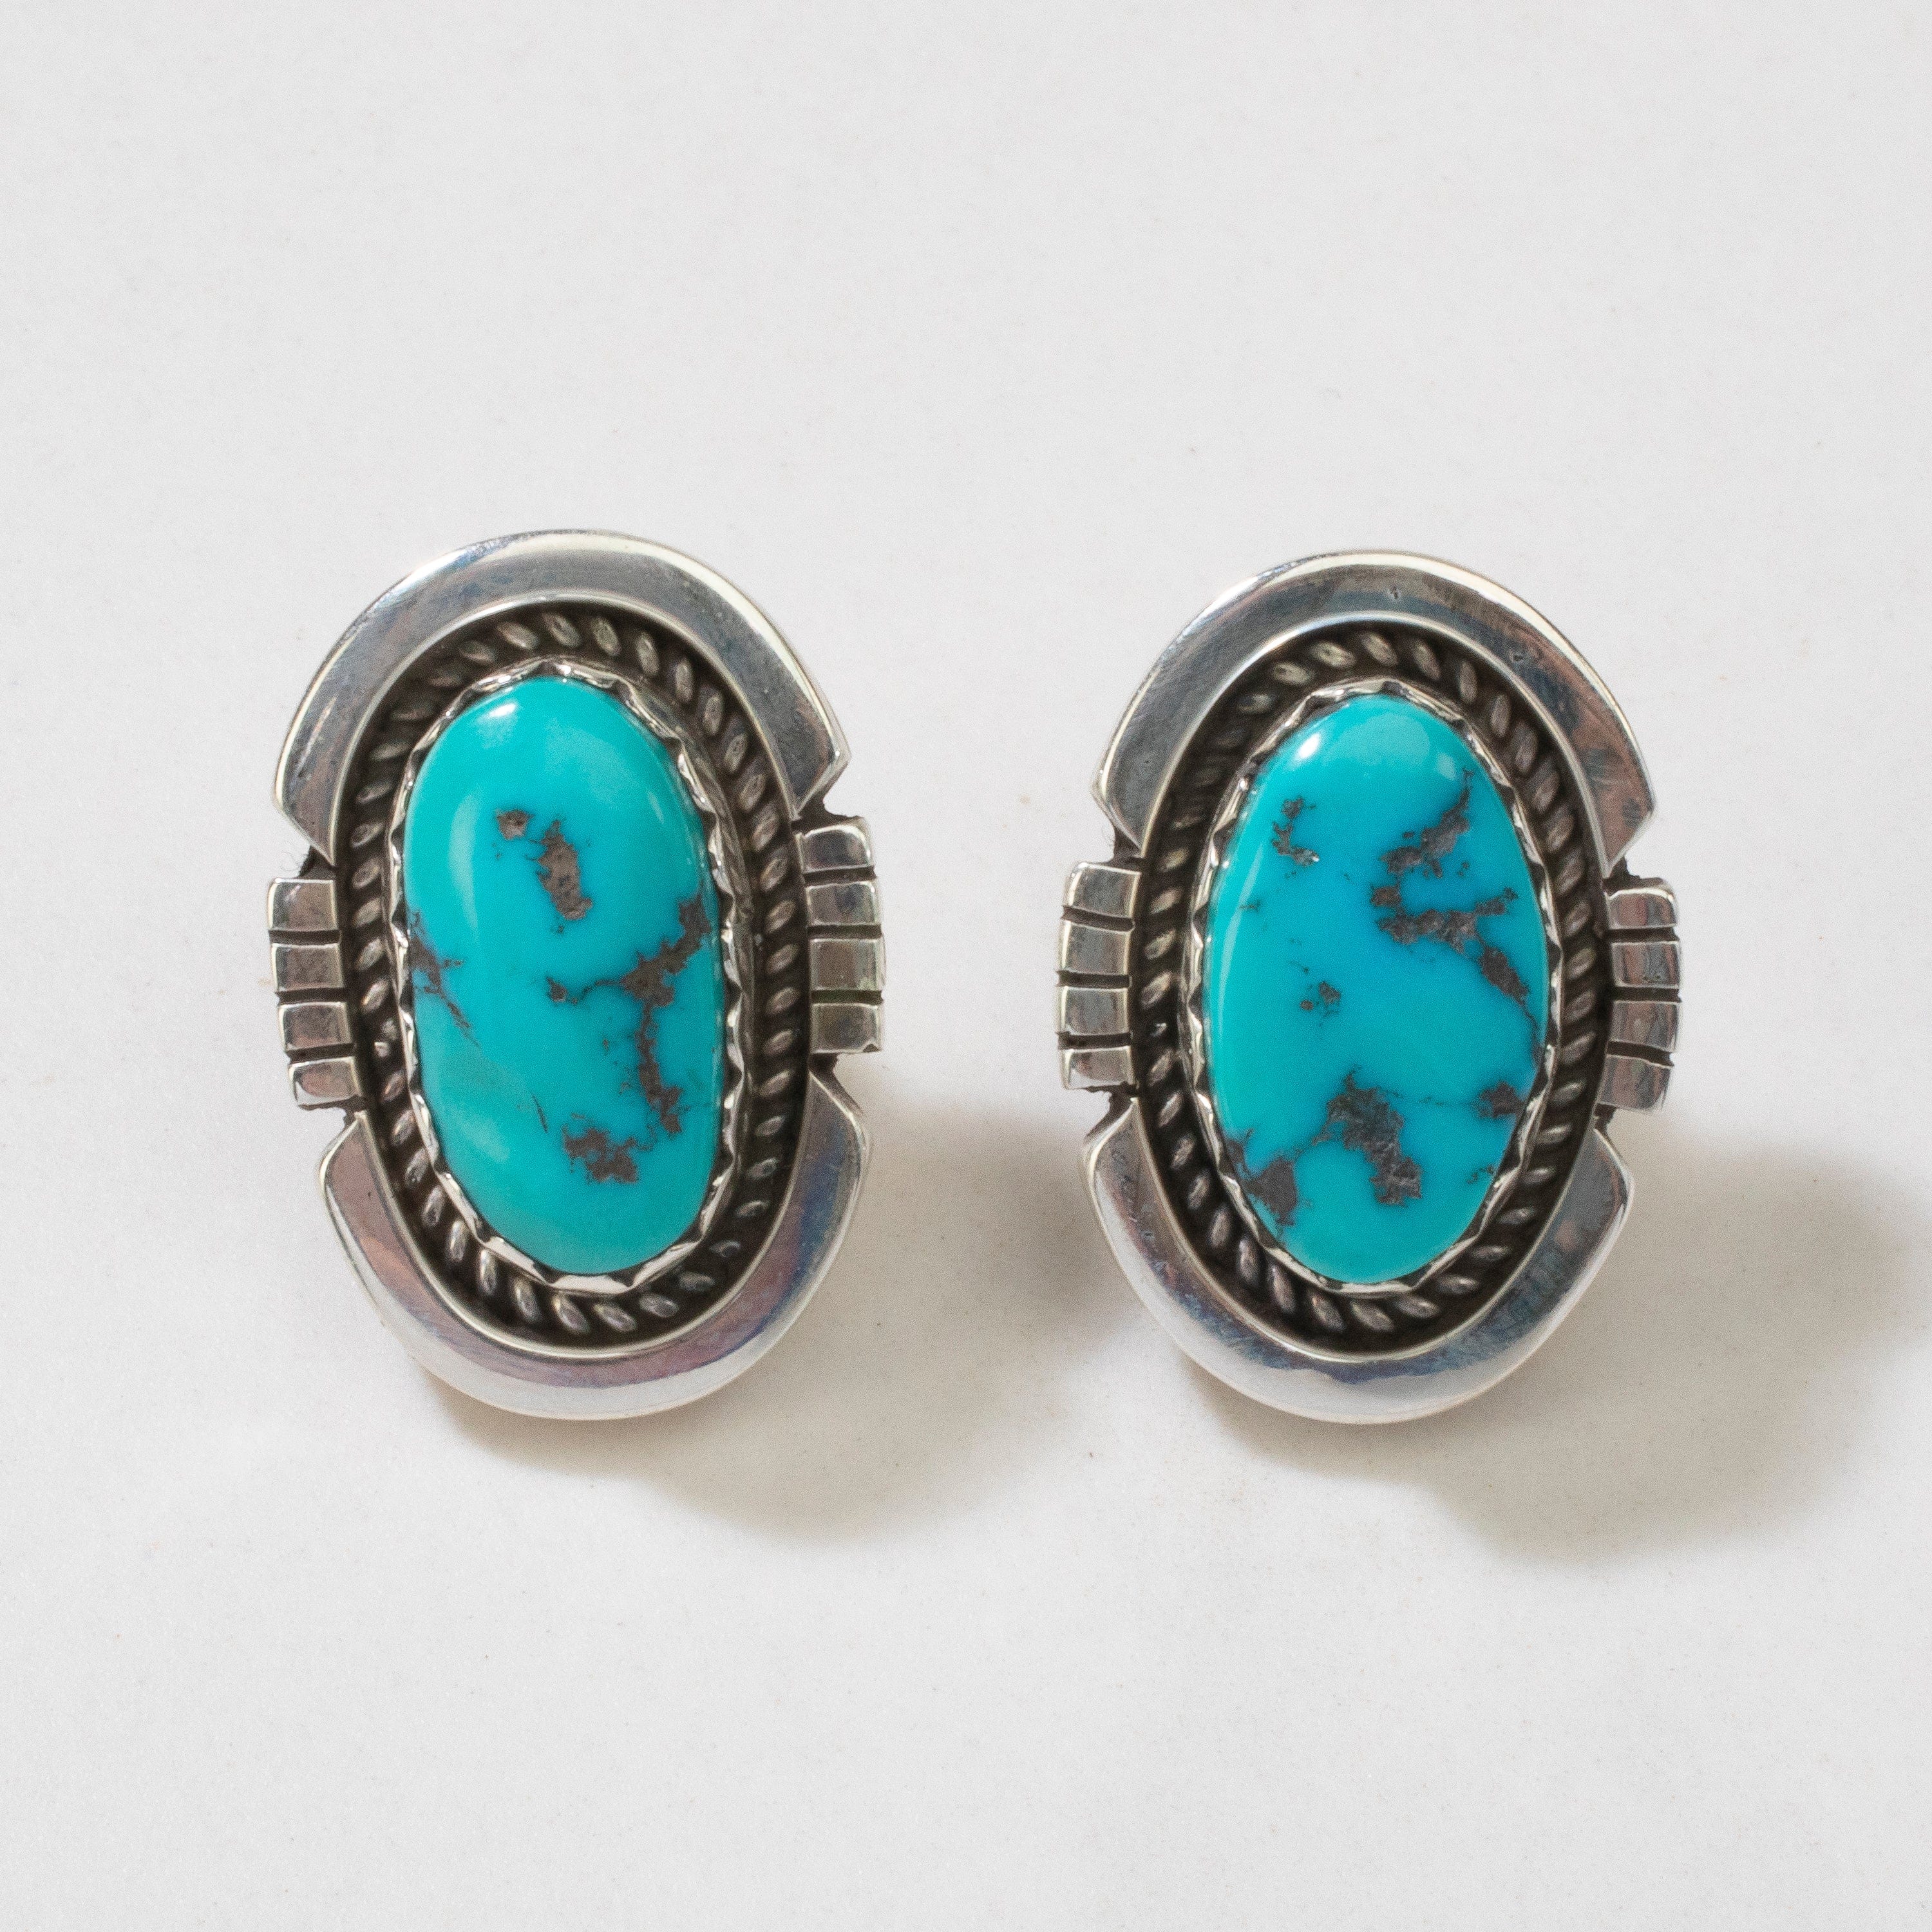 Kalifano Native American Jewelry Sleeping Beauty Oval Navajo USA Native American Made 925 Sterling Silver Earrings with Stud Backing NAE800.008